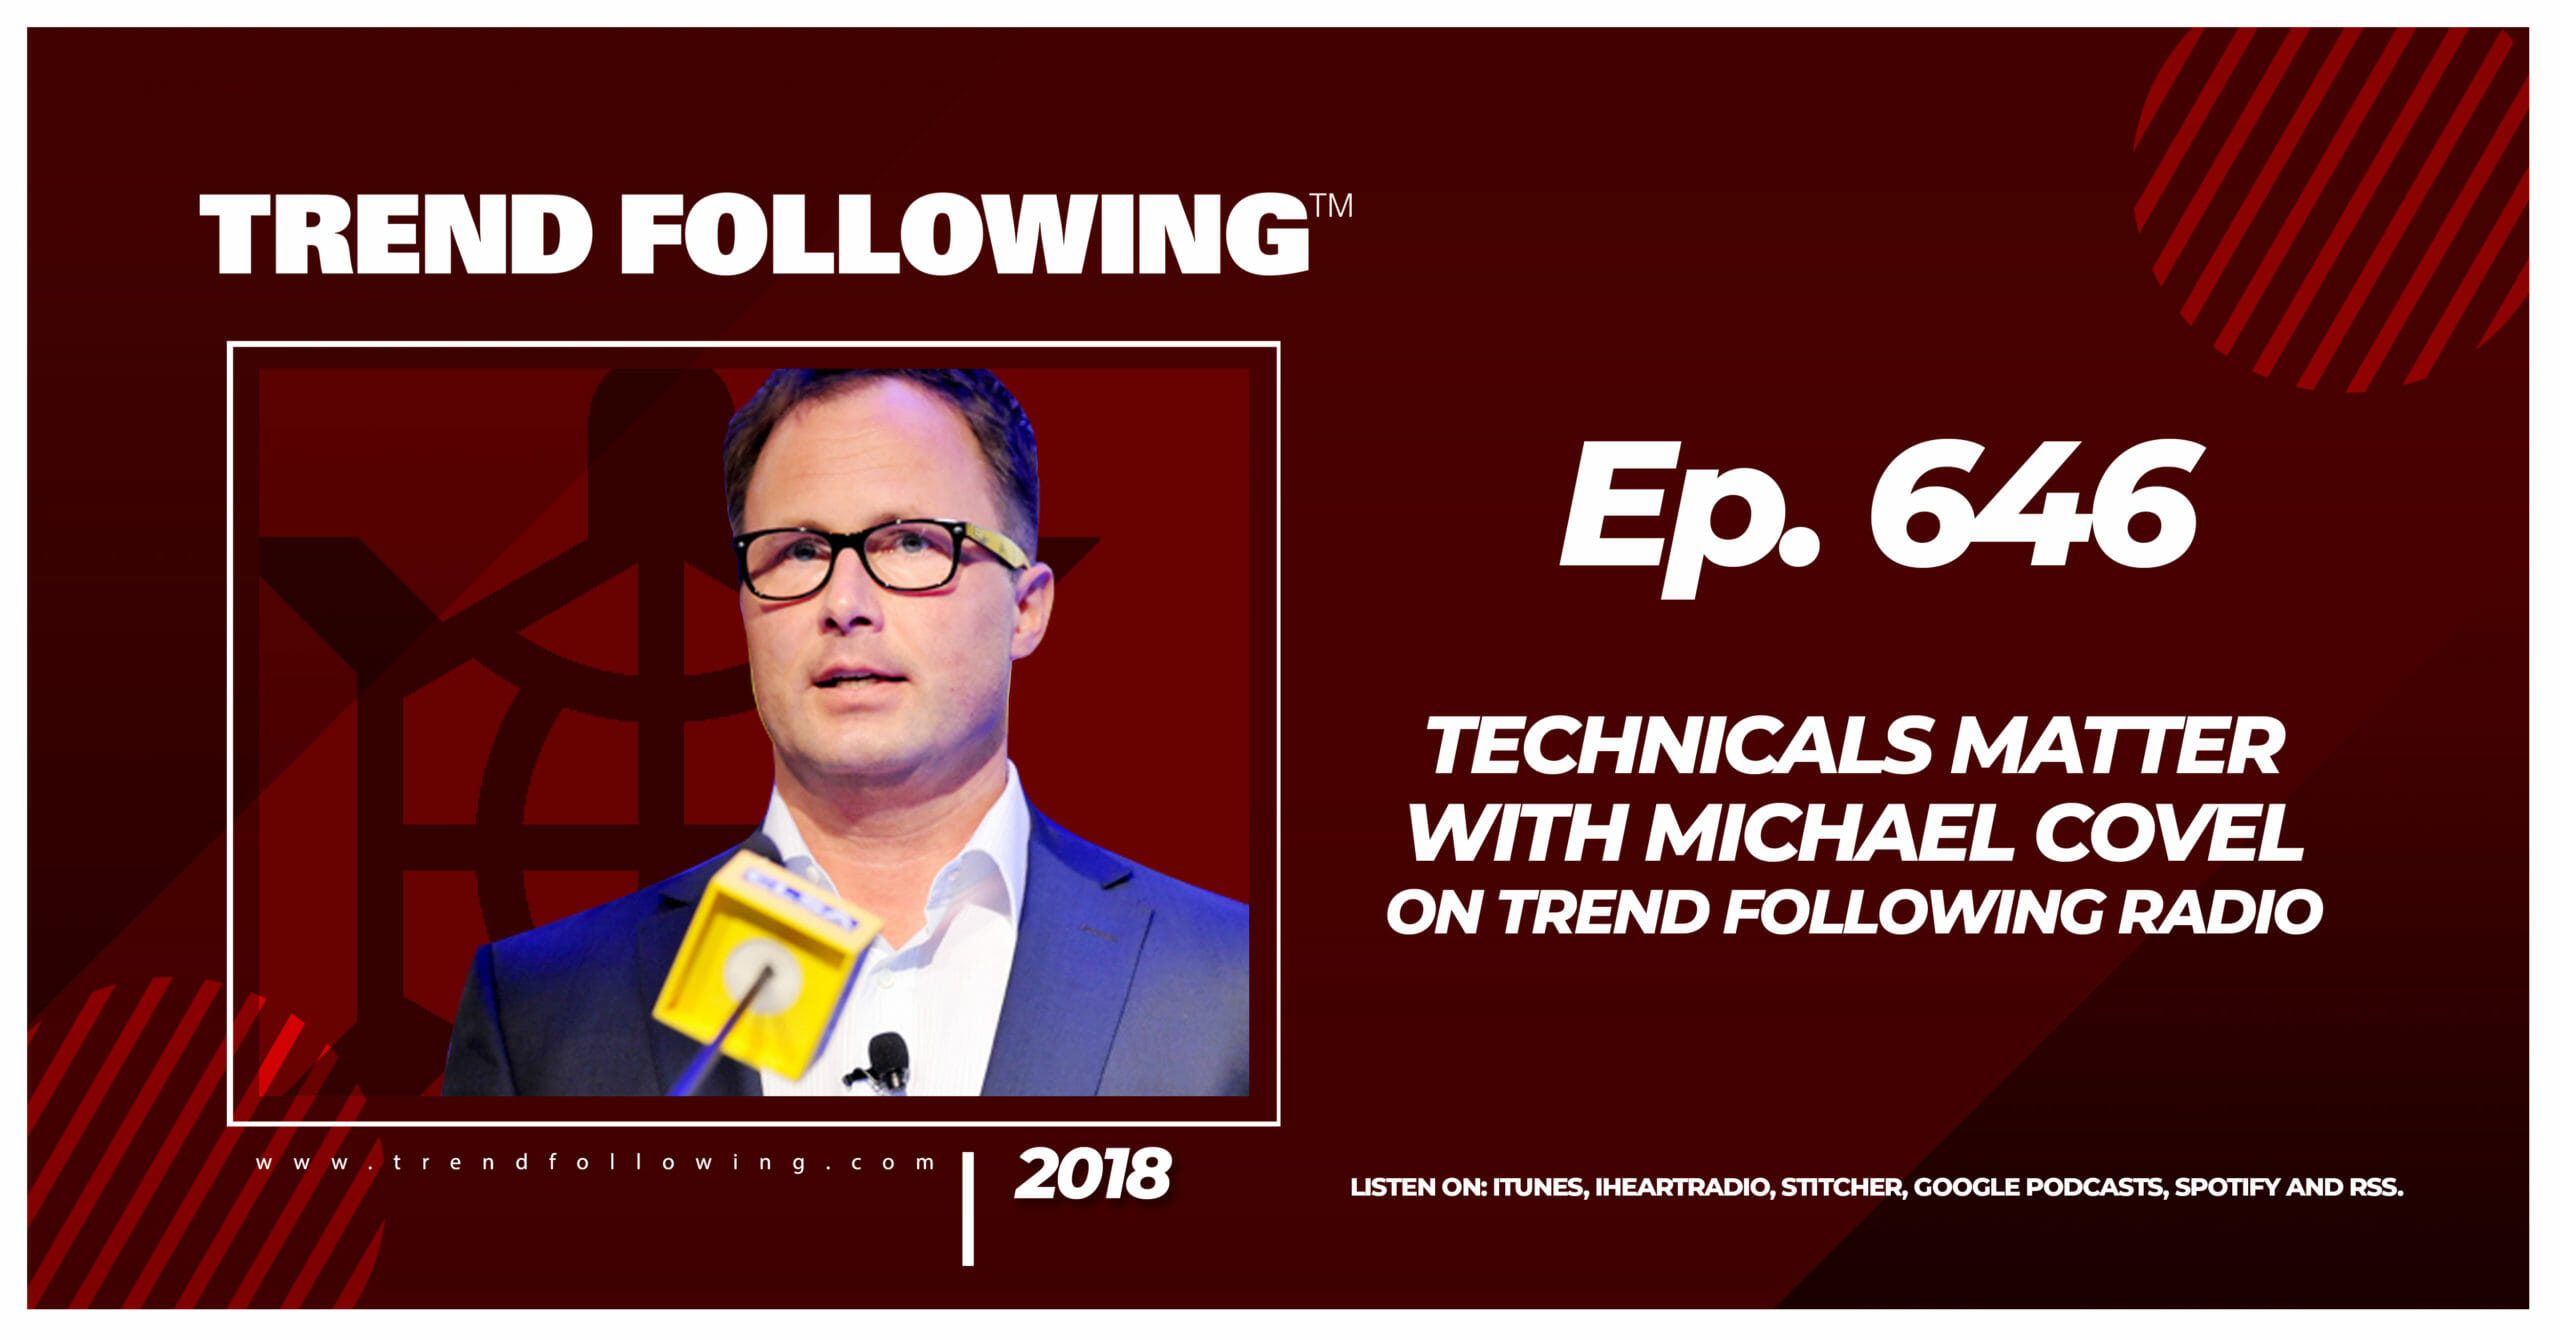 Technicals Matter with Michael Covel